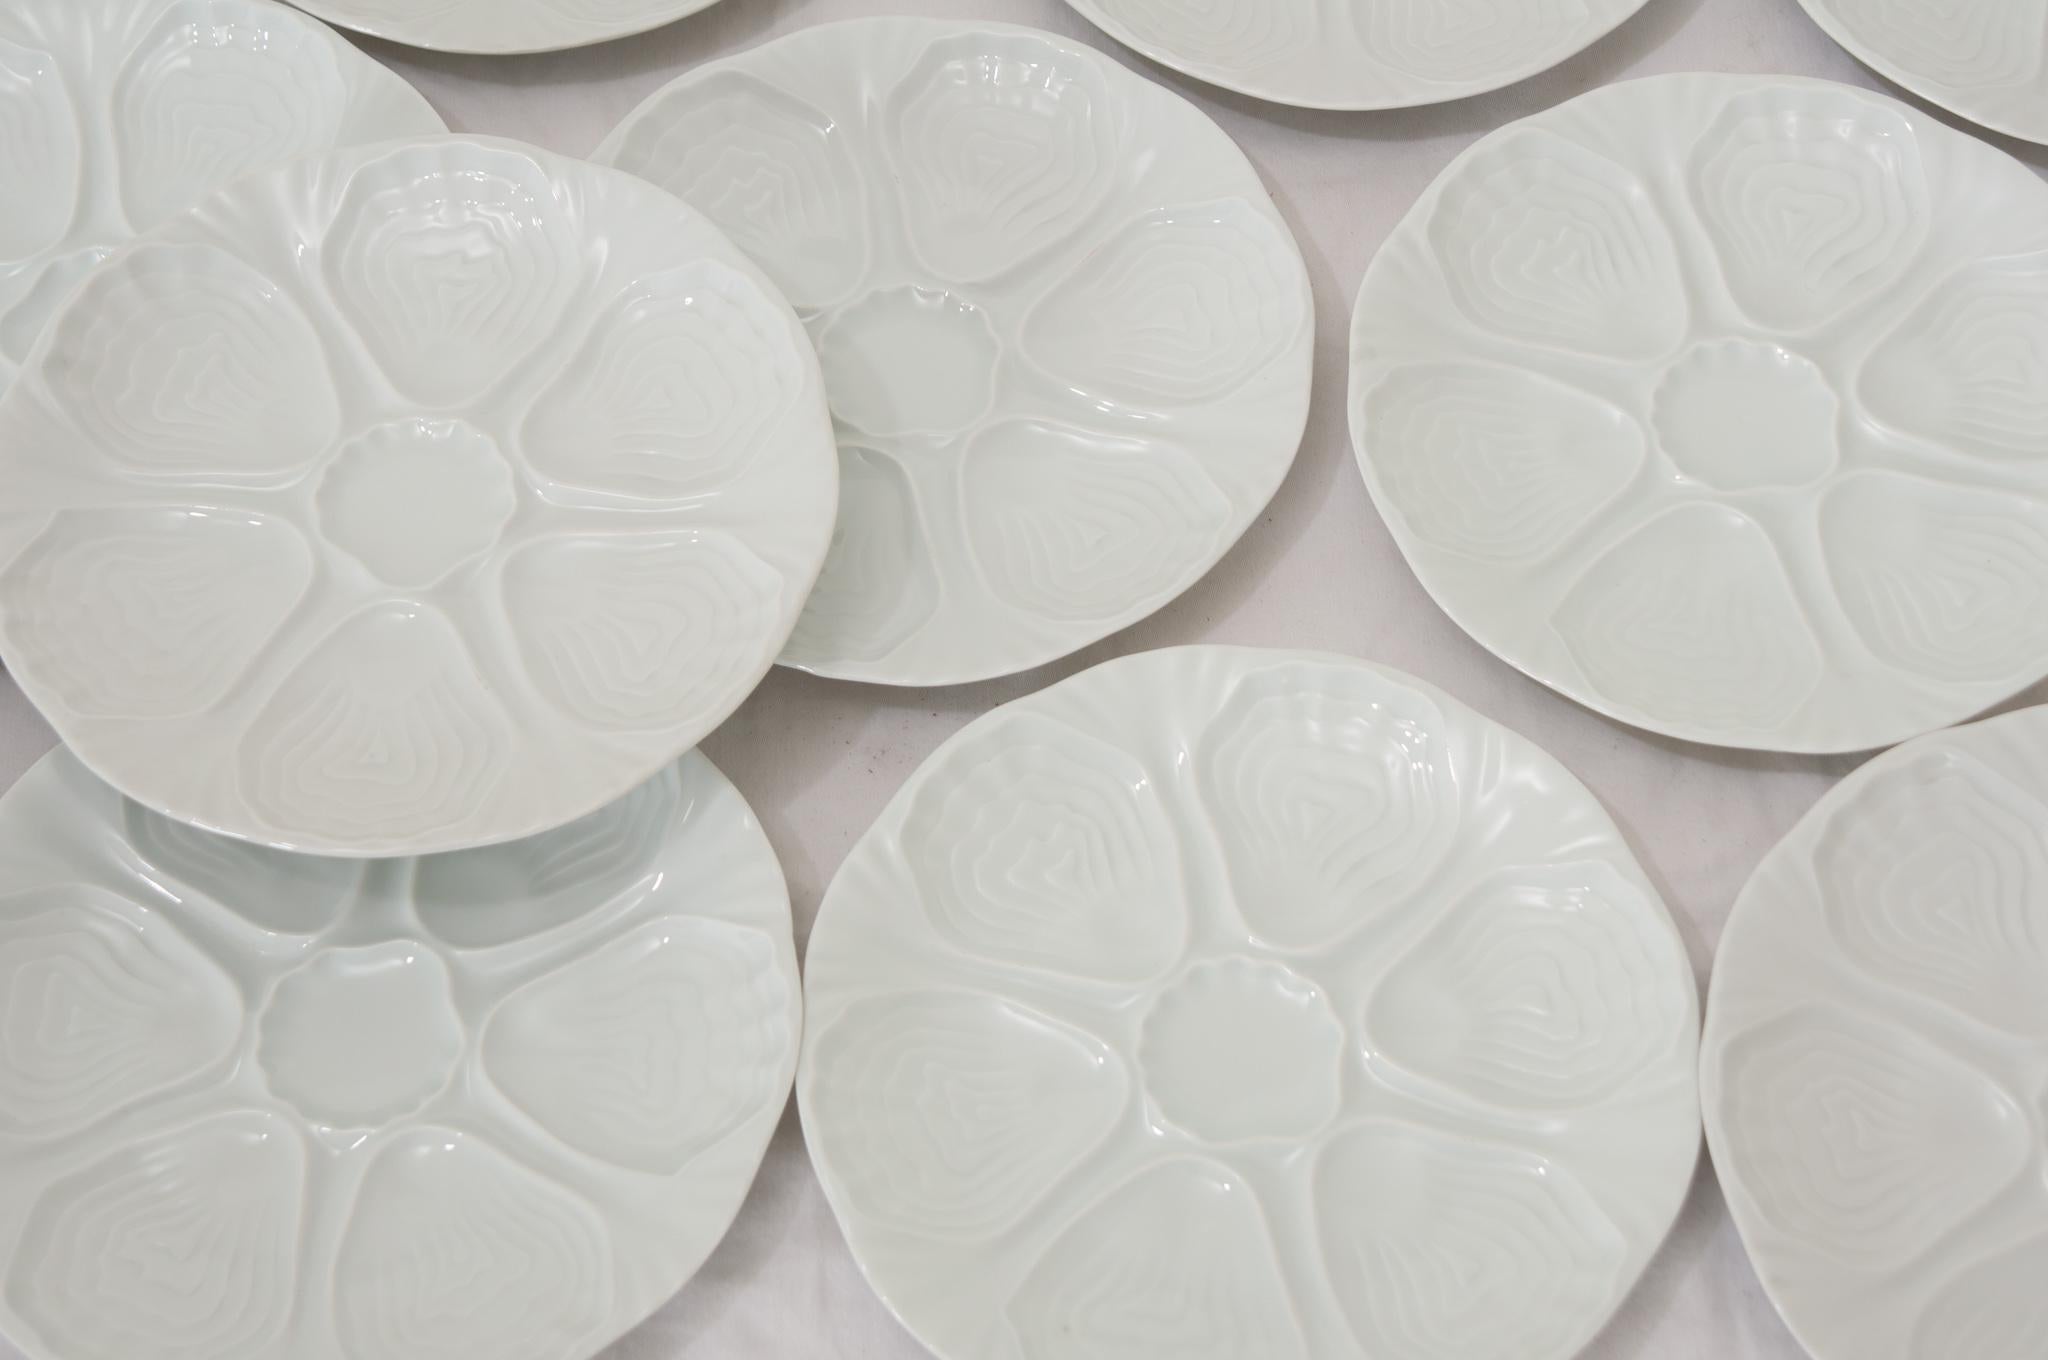 An elegant set of twelve French white oyster plates made by Hutschenreuther Porcelain in Germany during the 20th Century. These plates are fabulous with glossy molded and shaped centers and scalloped edges. The maker’s stamp can be found on the